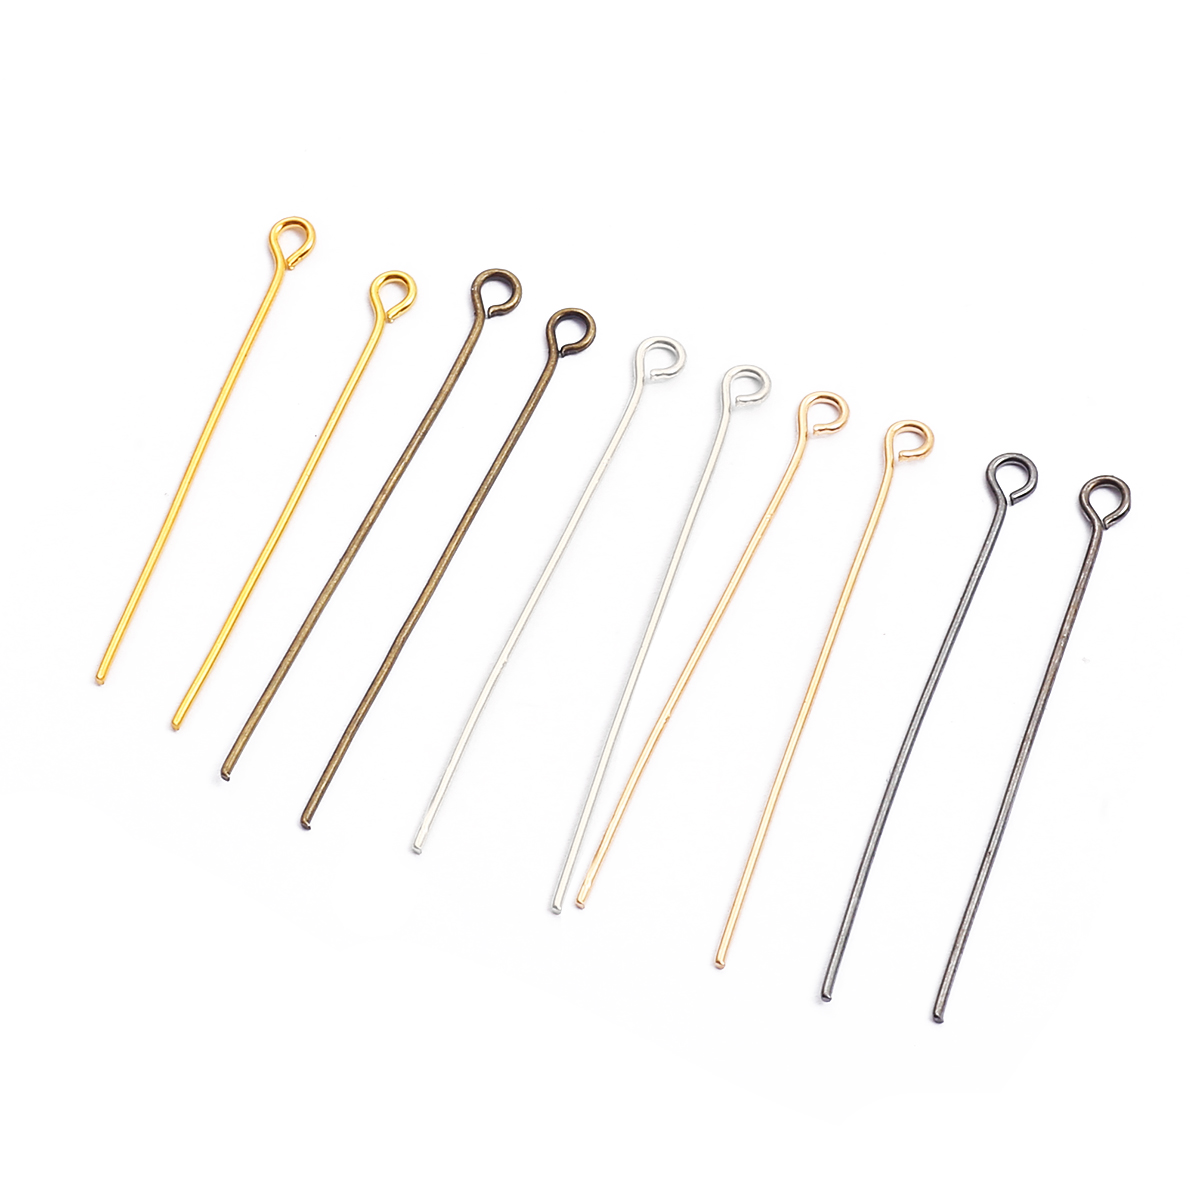 100PCS 16/20/30/40/50mm Ball Gold Plated Pins Jewelry Silver Finding Head 